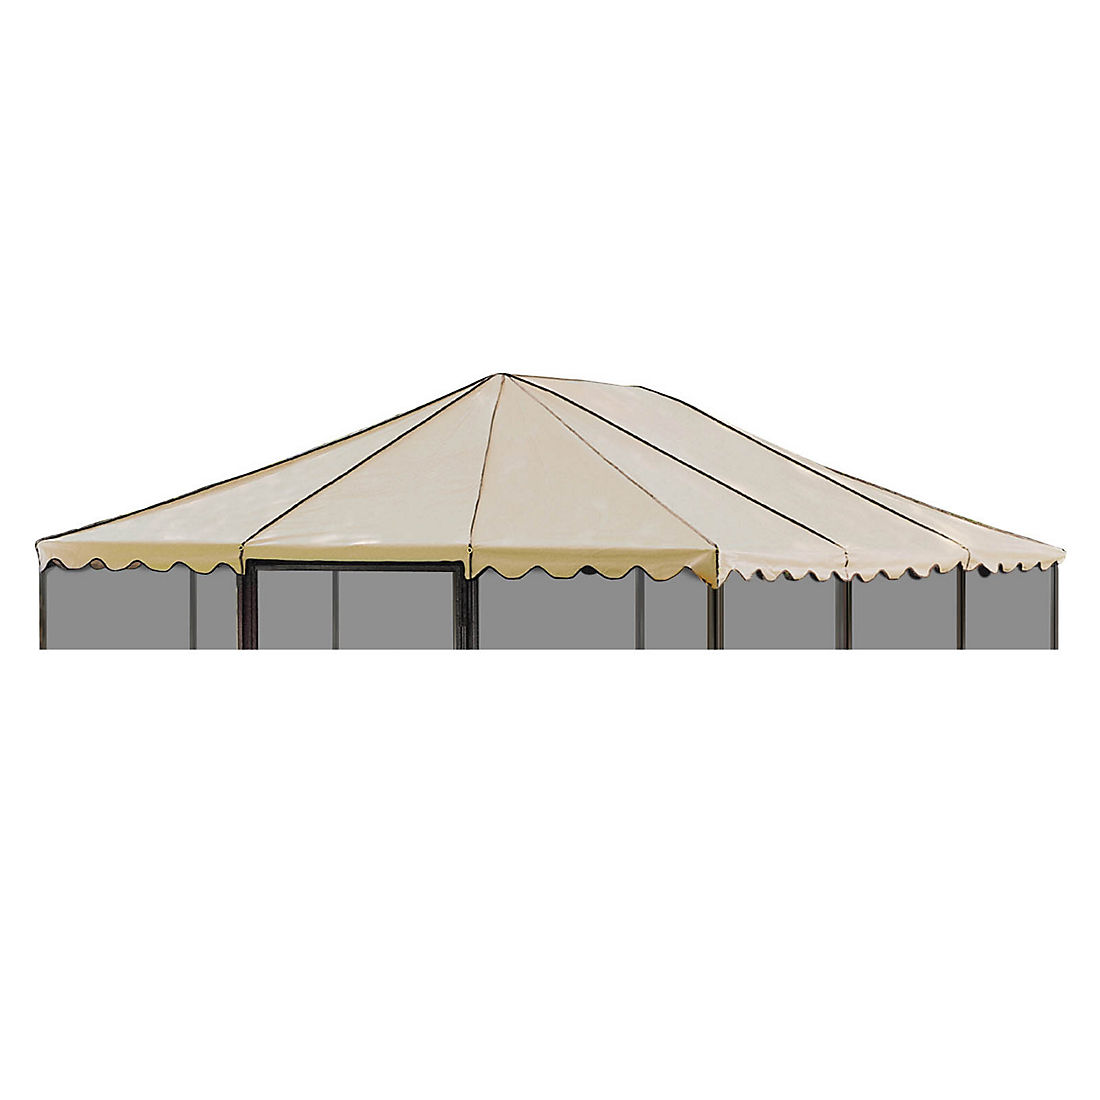 Casita Replacement Roof for 11'7" Square Screenhouse BJ's Wholesale Club